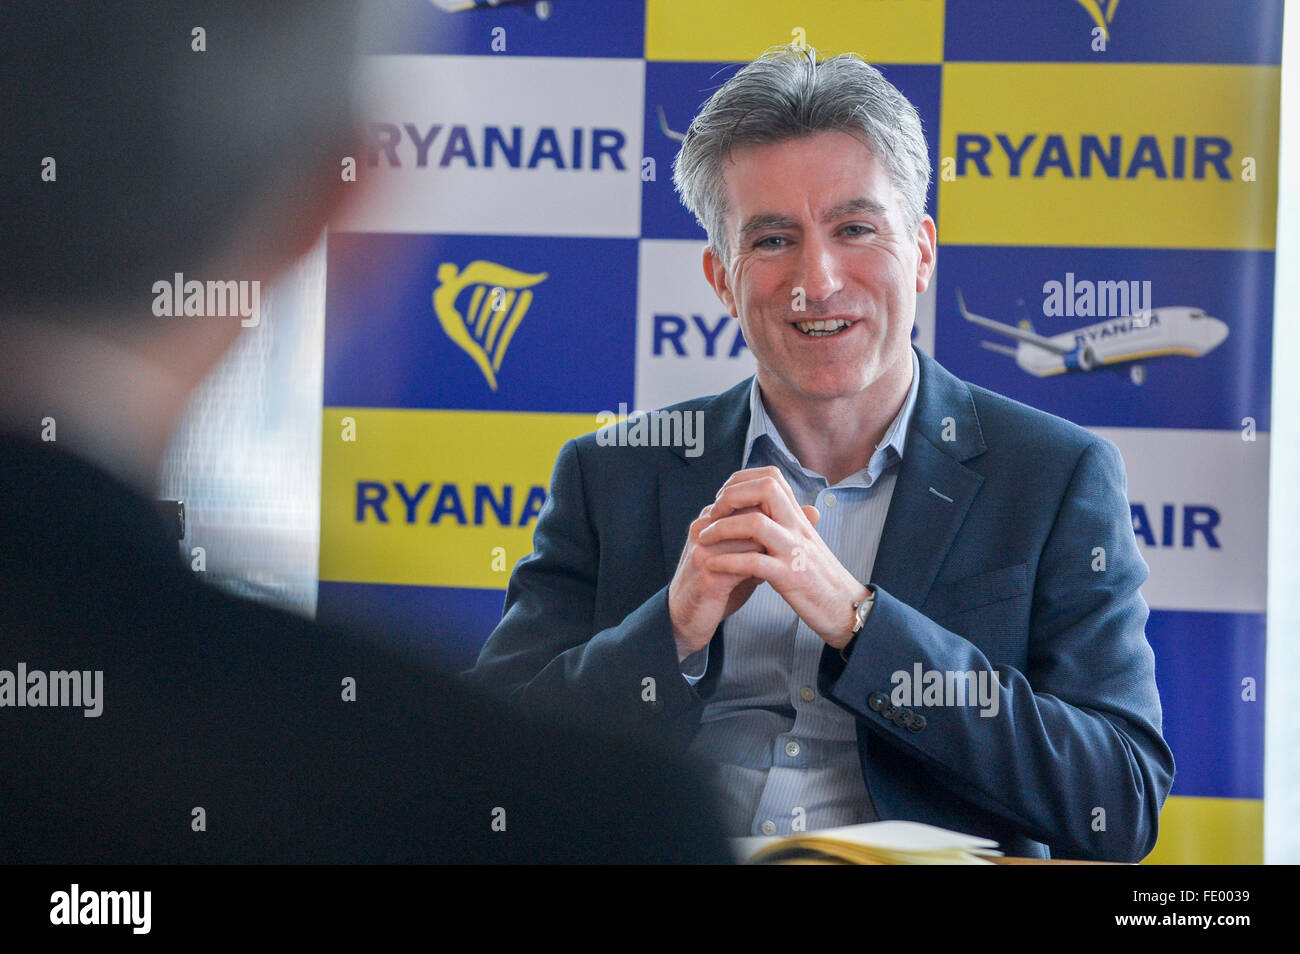 Ryanair’s CFO Neil Sorahan holds a press conference over Ryanair’s third quarter results for the period ended 31st December 2015 Stock Photo